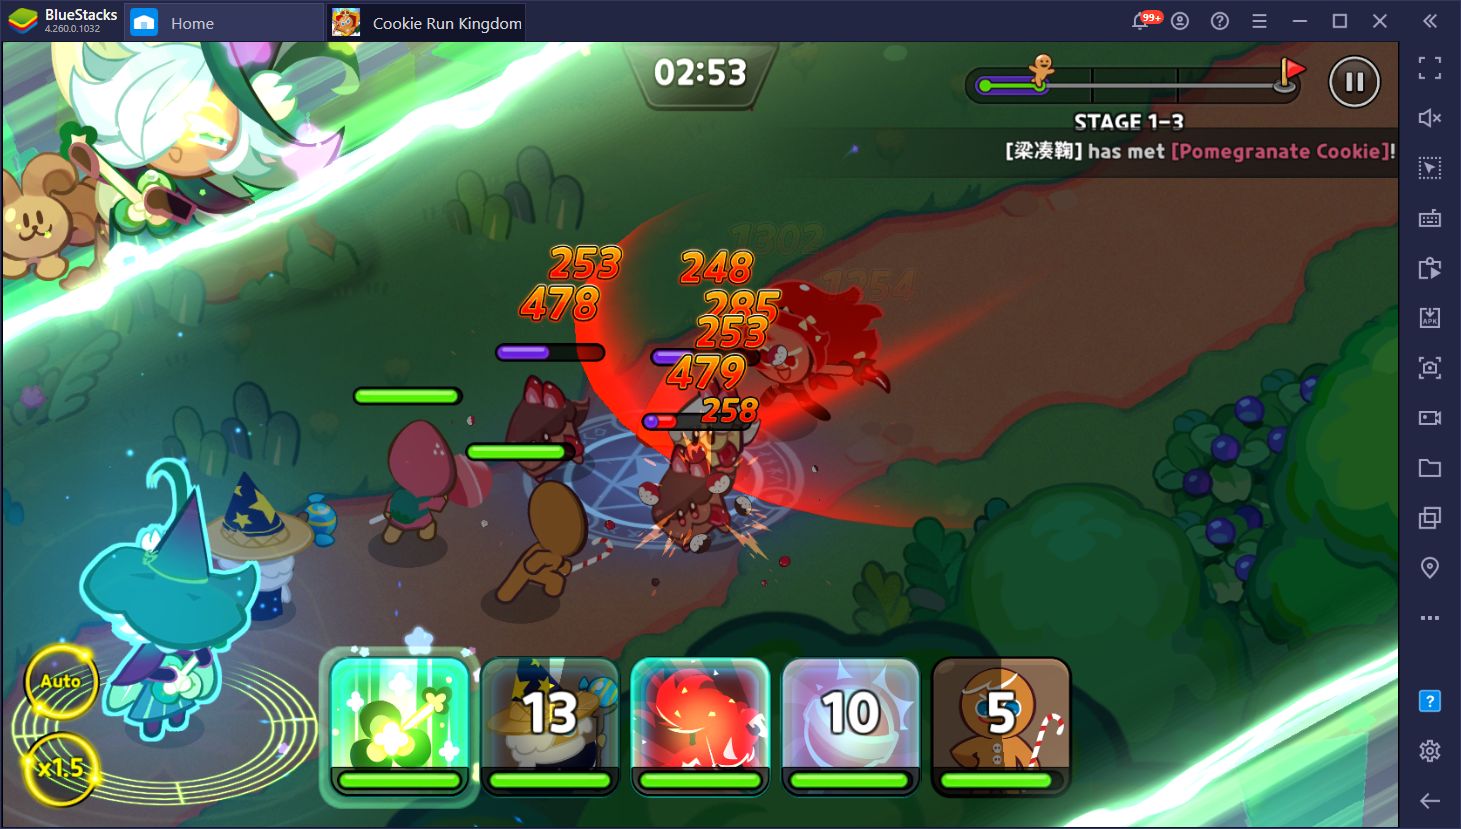 Cookie Run: Kingdom on PC - How to Use BlueStacks’ Tools to Build your Cookie Empire